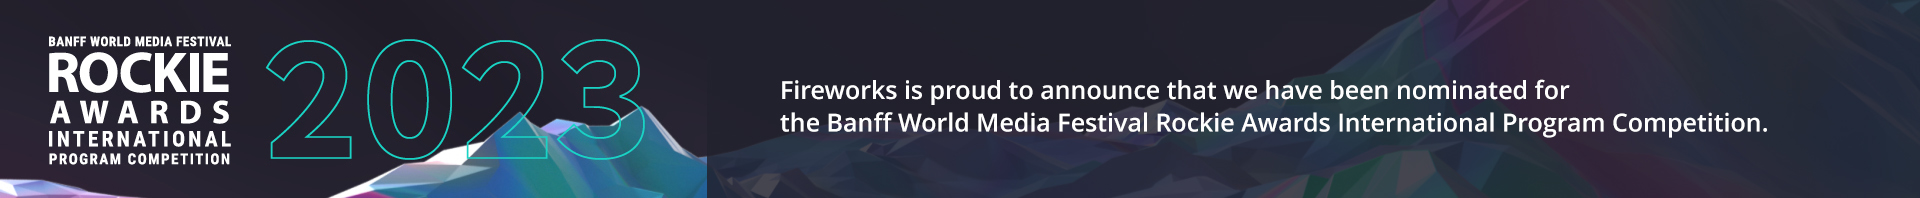 Fireworks is proud to announce that we have been nominated for the Banff World Media Festival Rockie Awards International Program Competition